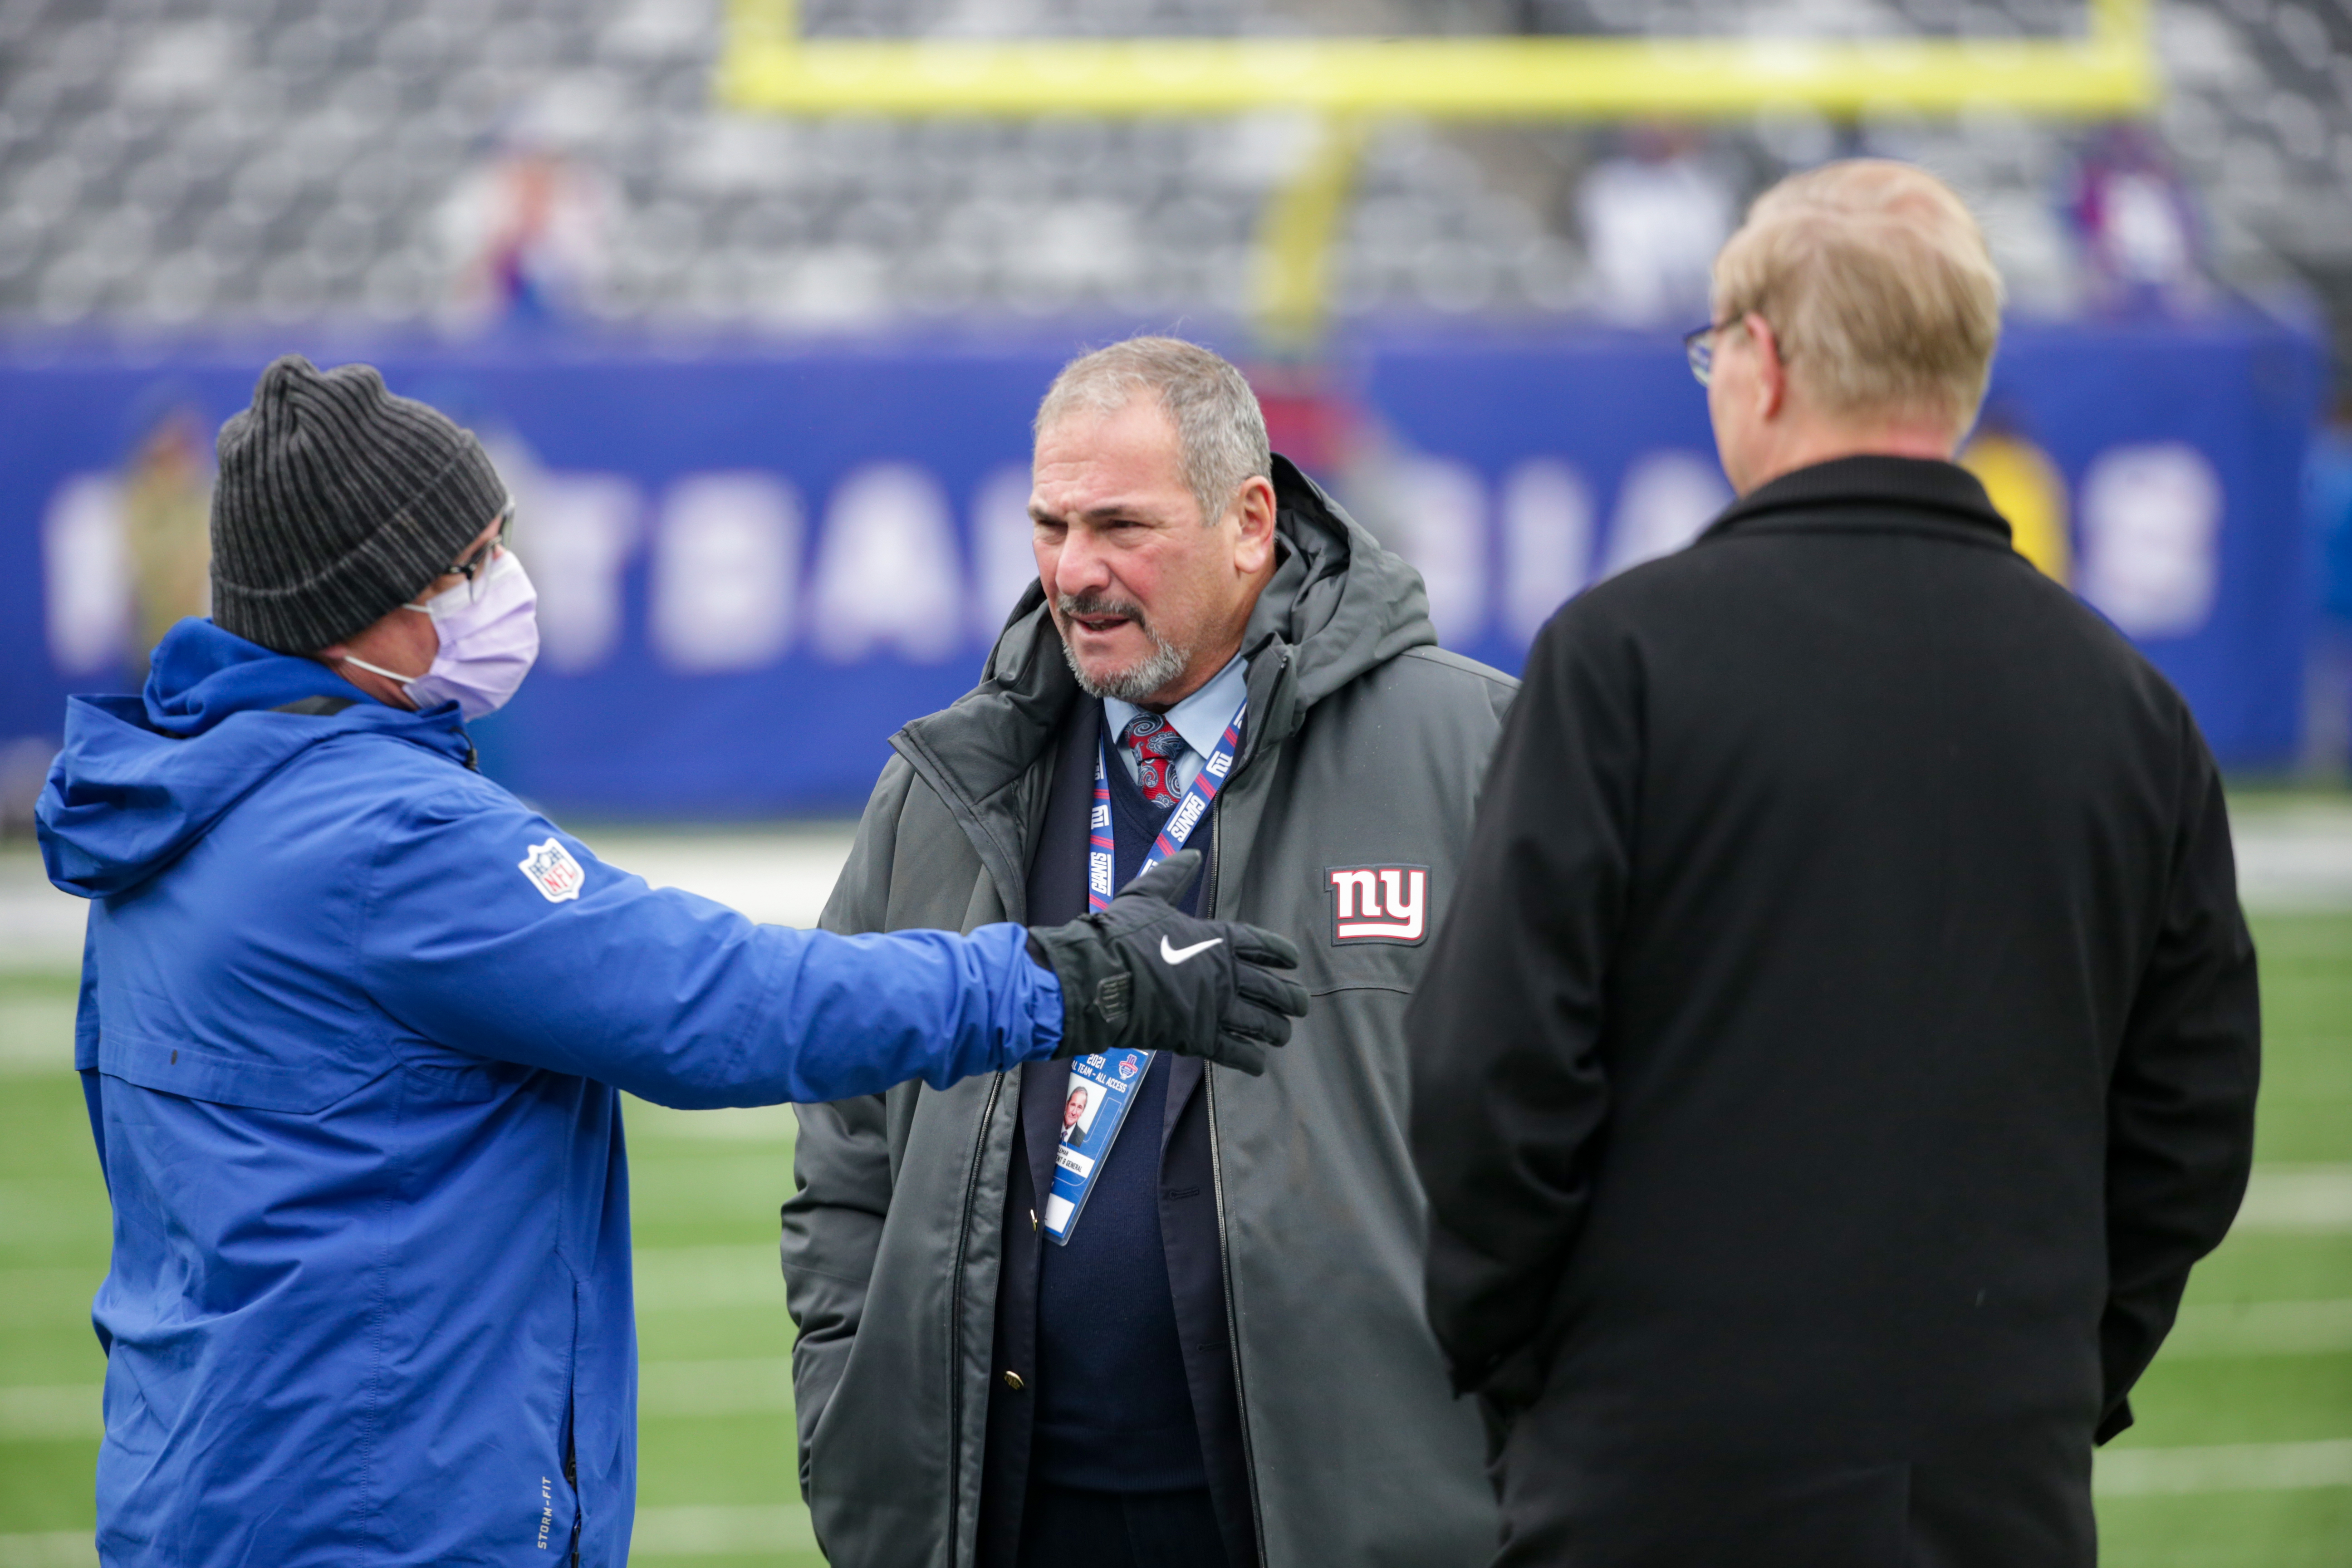 New York Giants VP of Communications Pat Hanlon (l to r) Giants general manager Dave Gettleman and owner John Mara during pregame warmups as the Giants prepare to host the Washington Football Team on Sunday, Jan. 9, 2022 in East Rutherford, N.J.